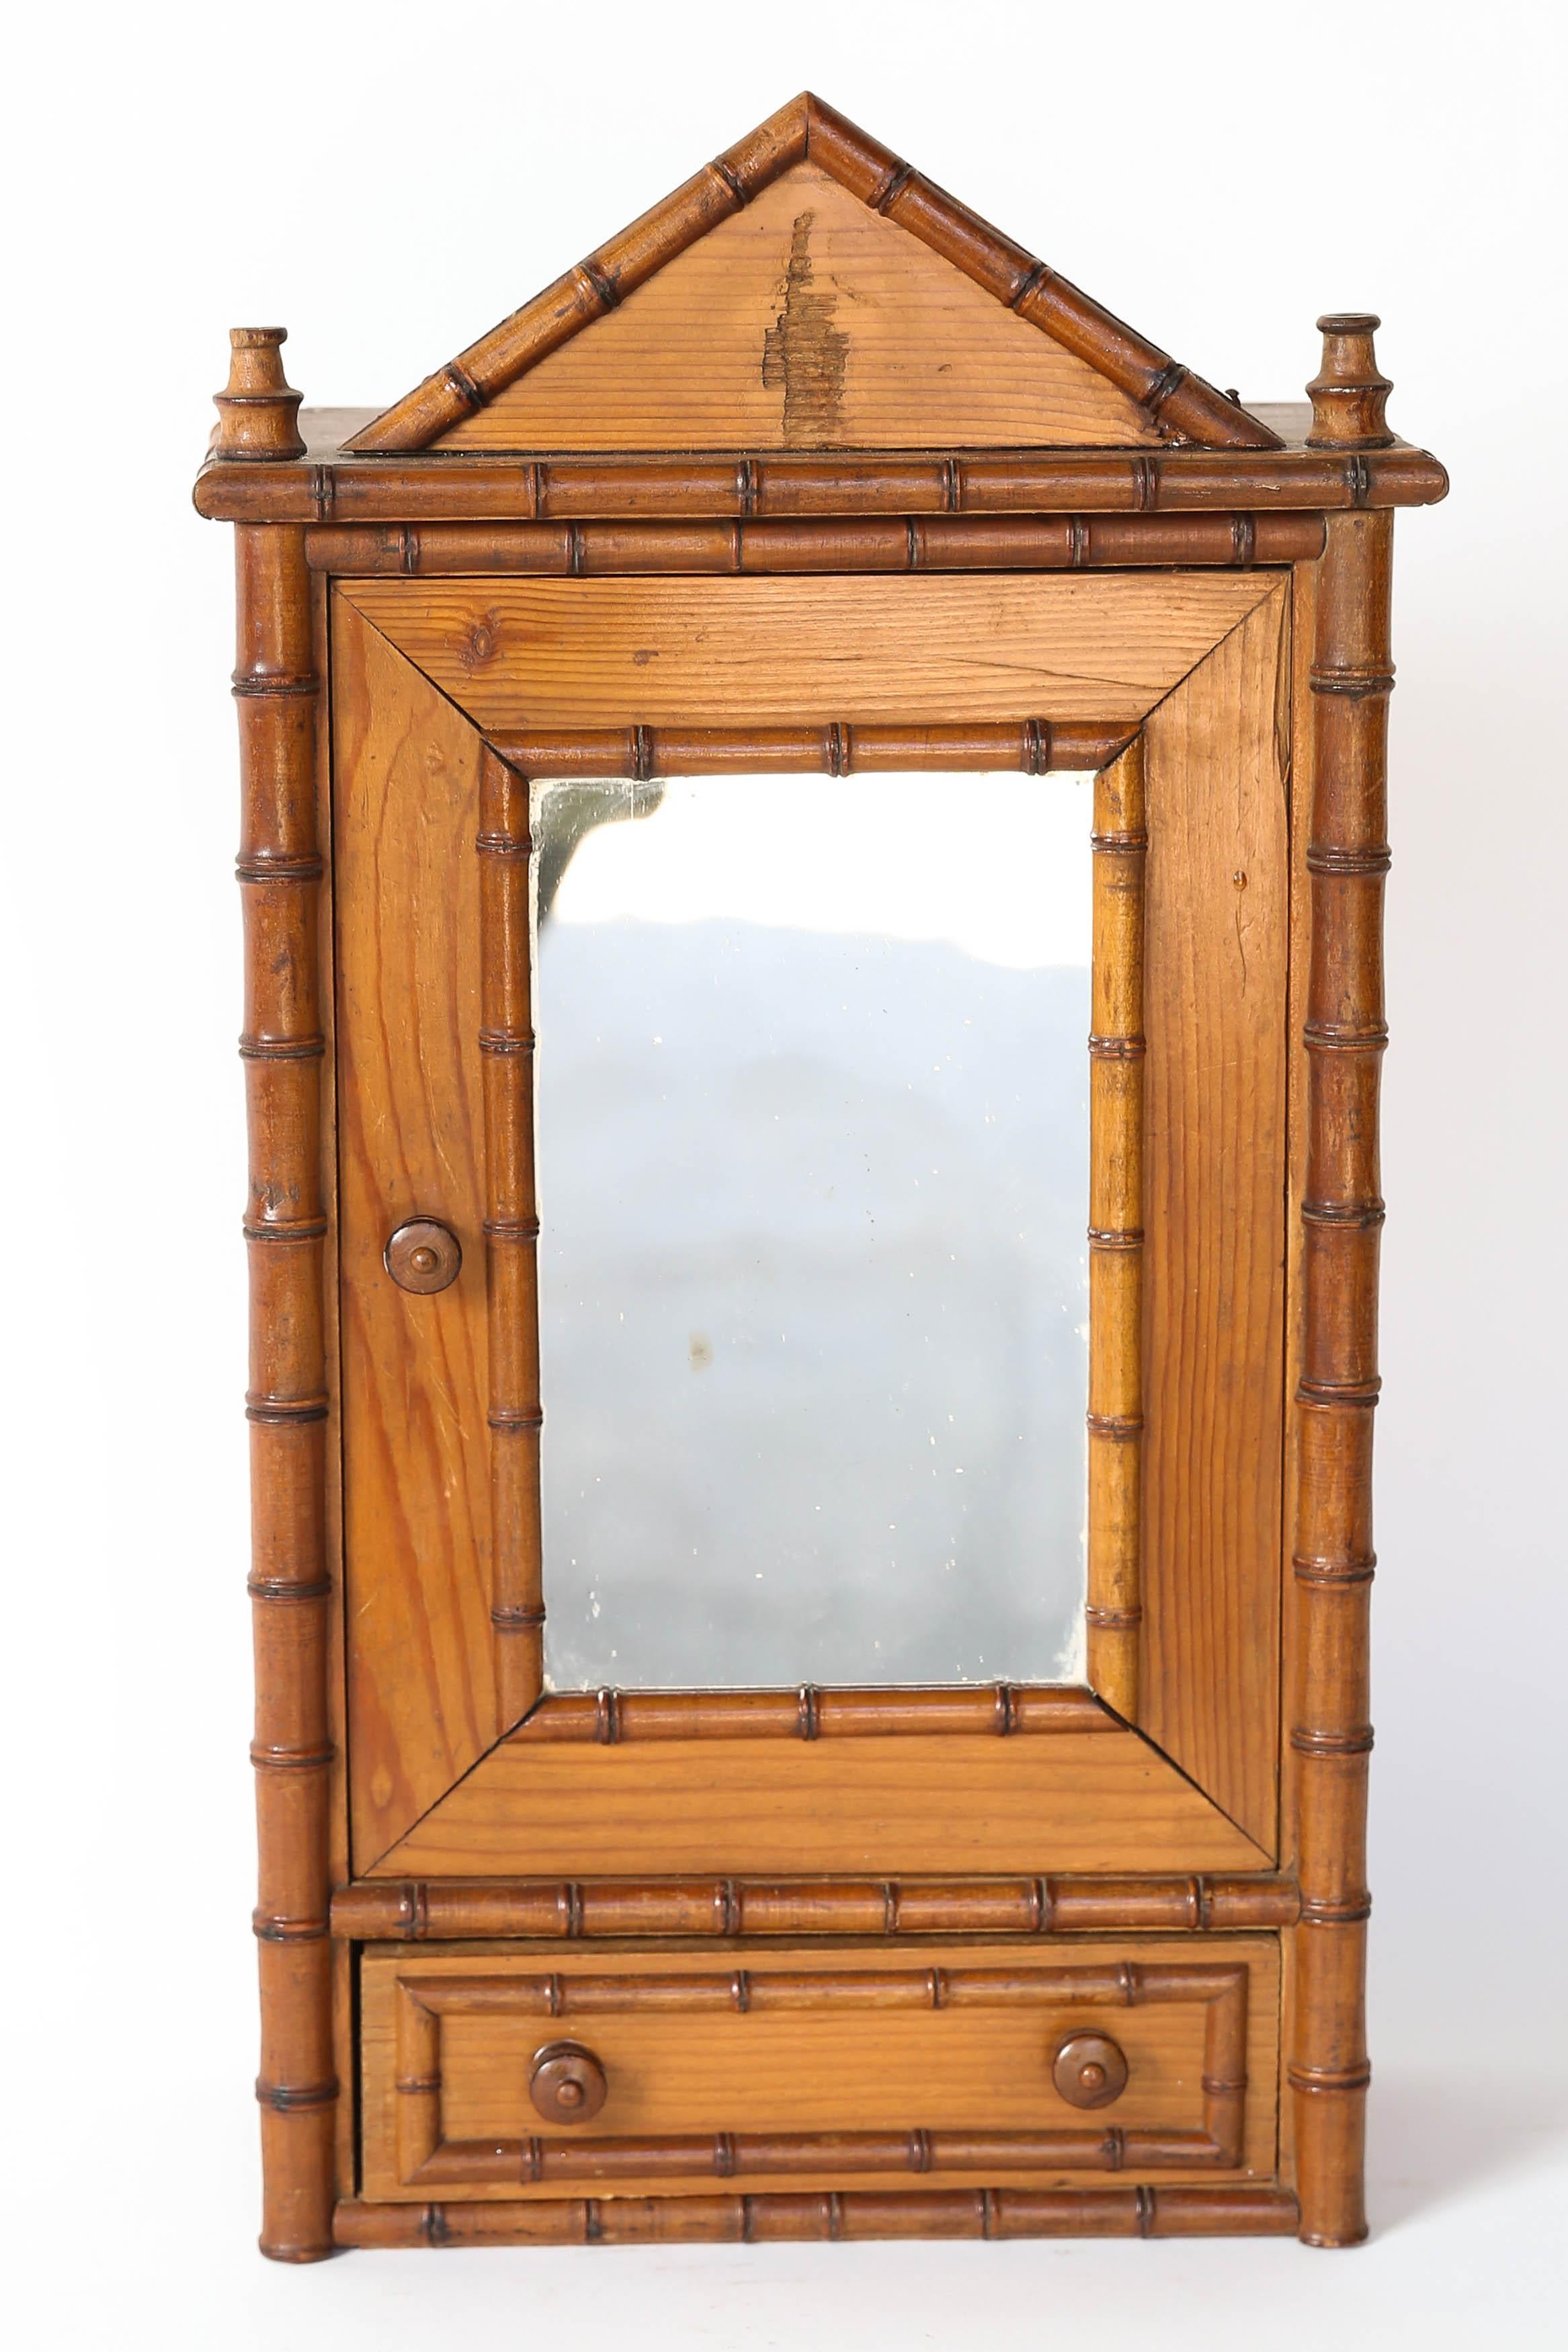 Antique French miniature armoire or wardrobe made from faux bamboo with a mirrored door and one drawer. The mirrored door opens leaving a wonderful space to attach hooks to hold necklaces. Below the door is a bottom drawer for other treasures. This